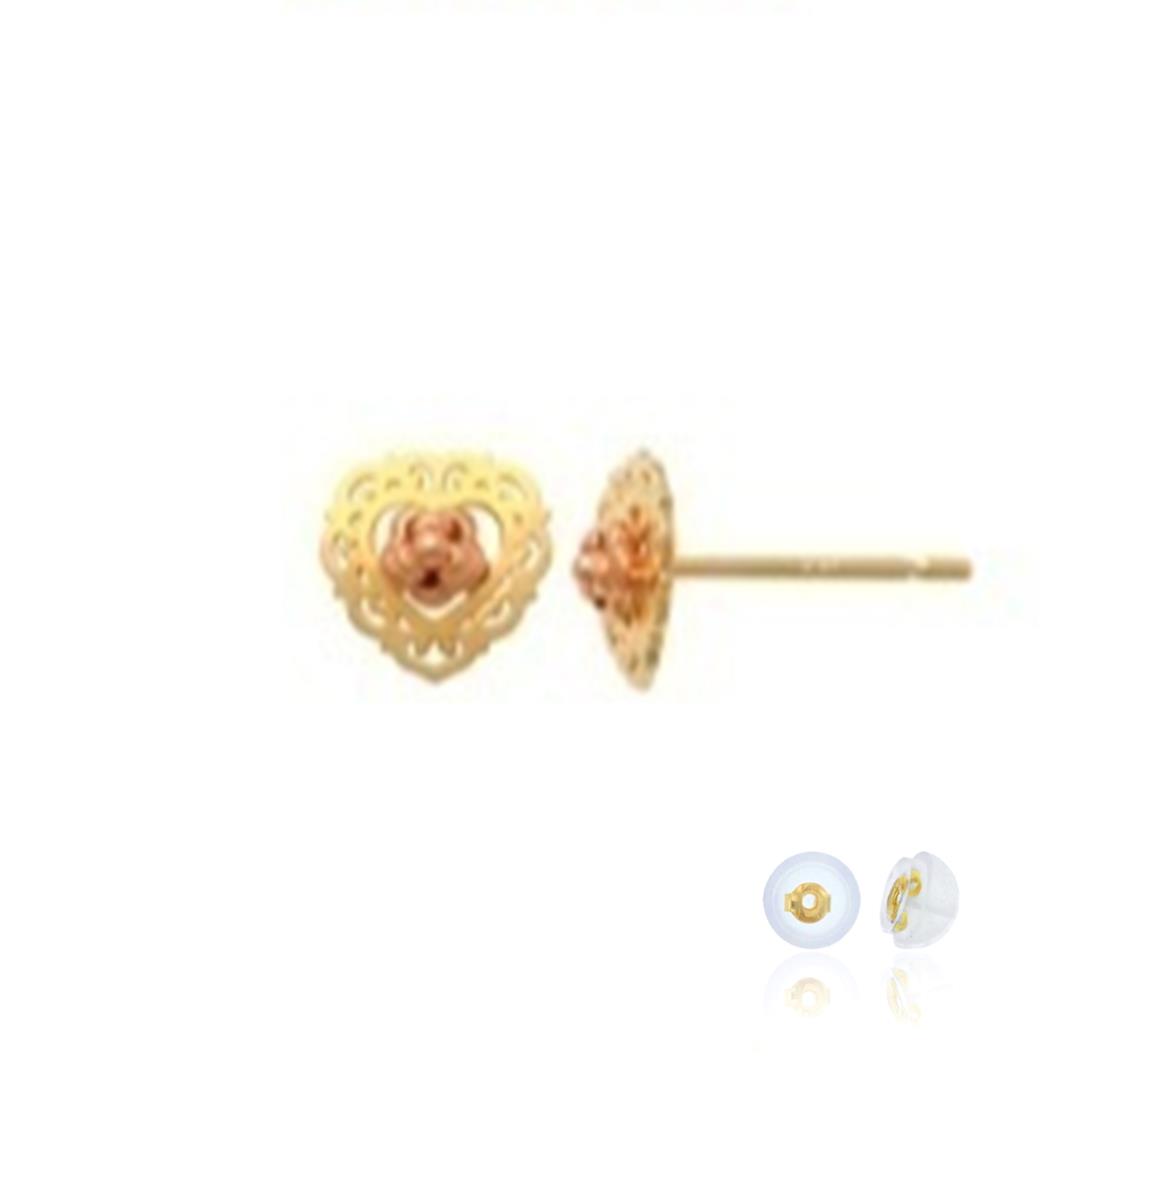 10K Yellow & Rose Gold Heart 6mm Stud Earring with Silicone Back